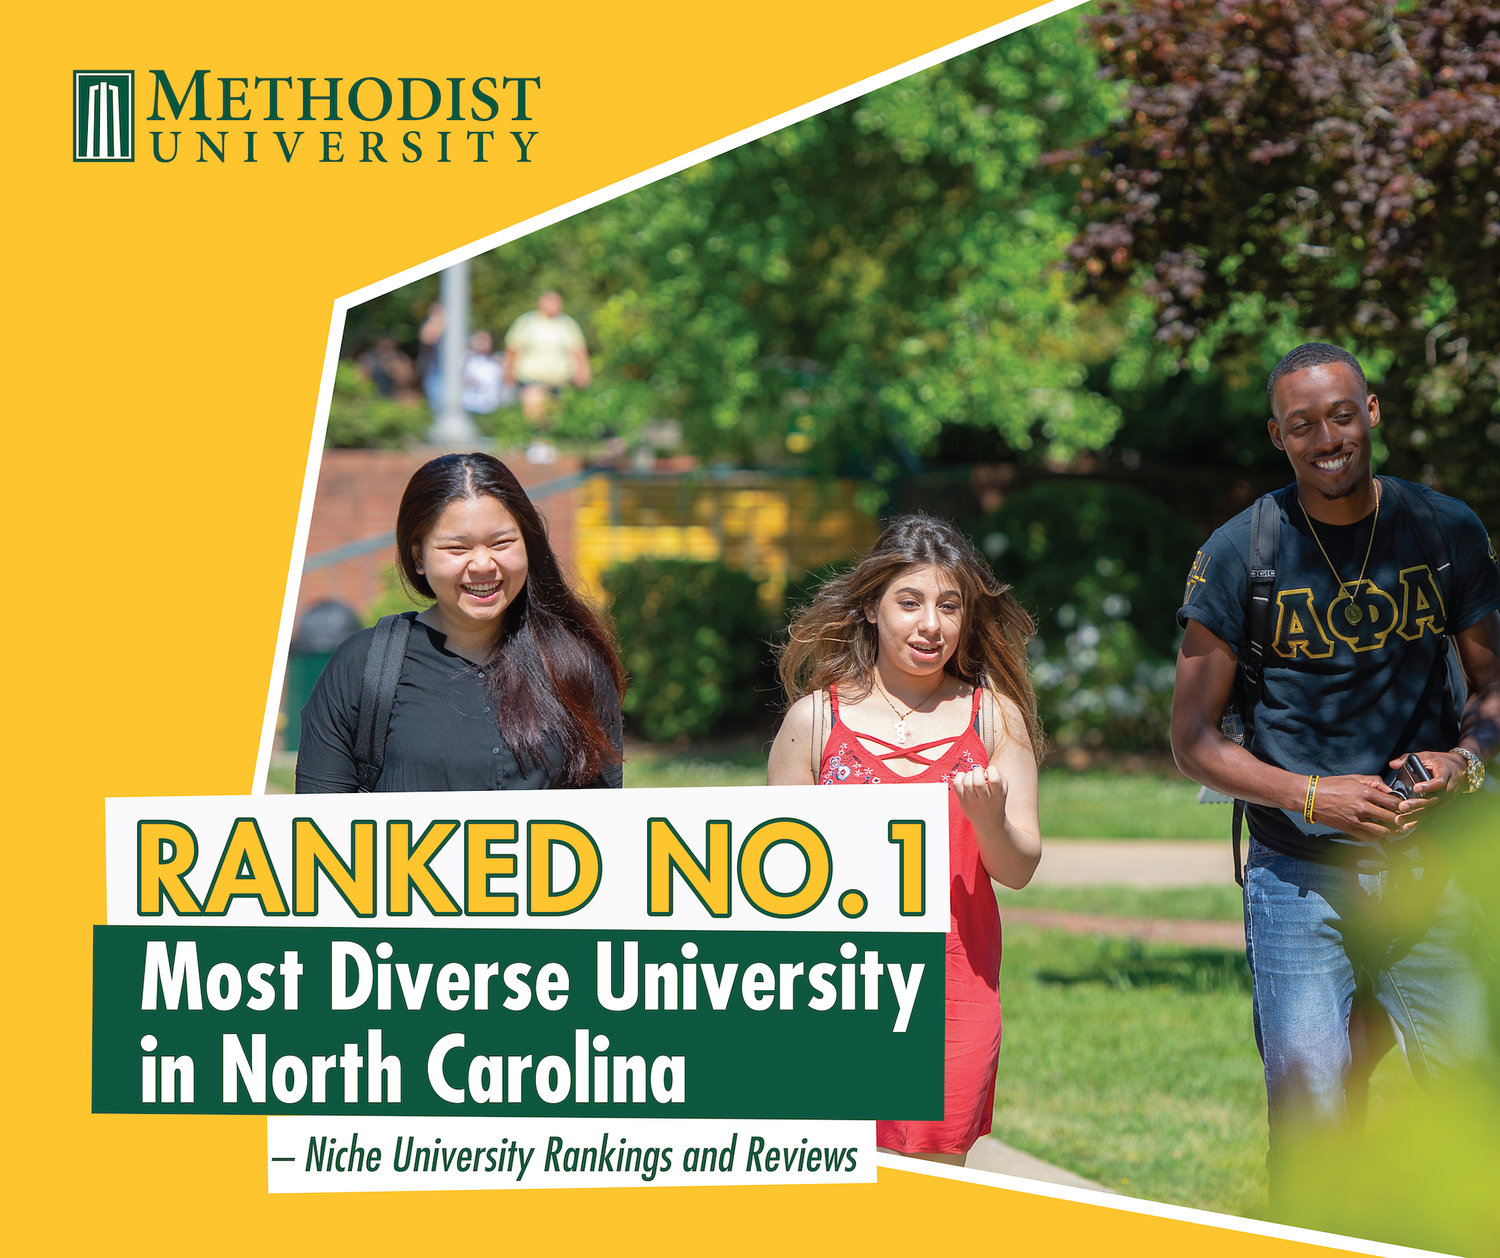 Methodist University has been recognized as the No. 1, most diverse university in North Carolina in 2022, according to Niche University Rankings and Reviews, the university said in a release.